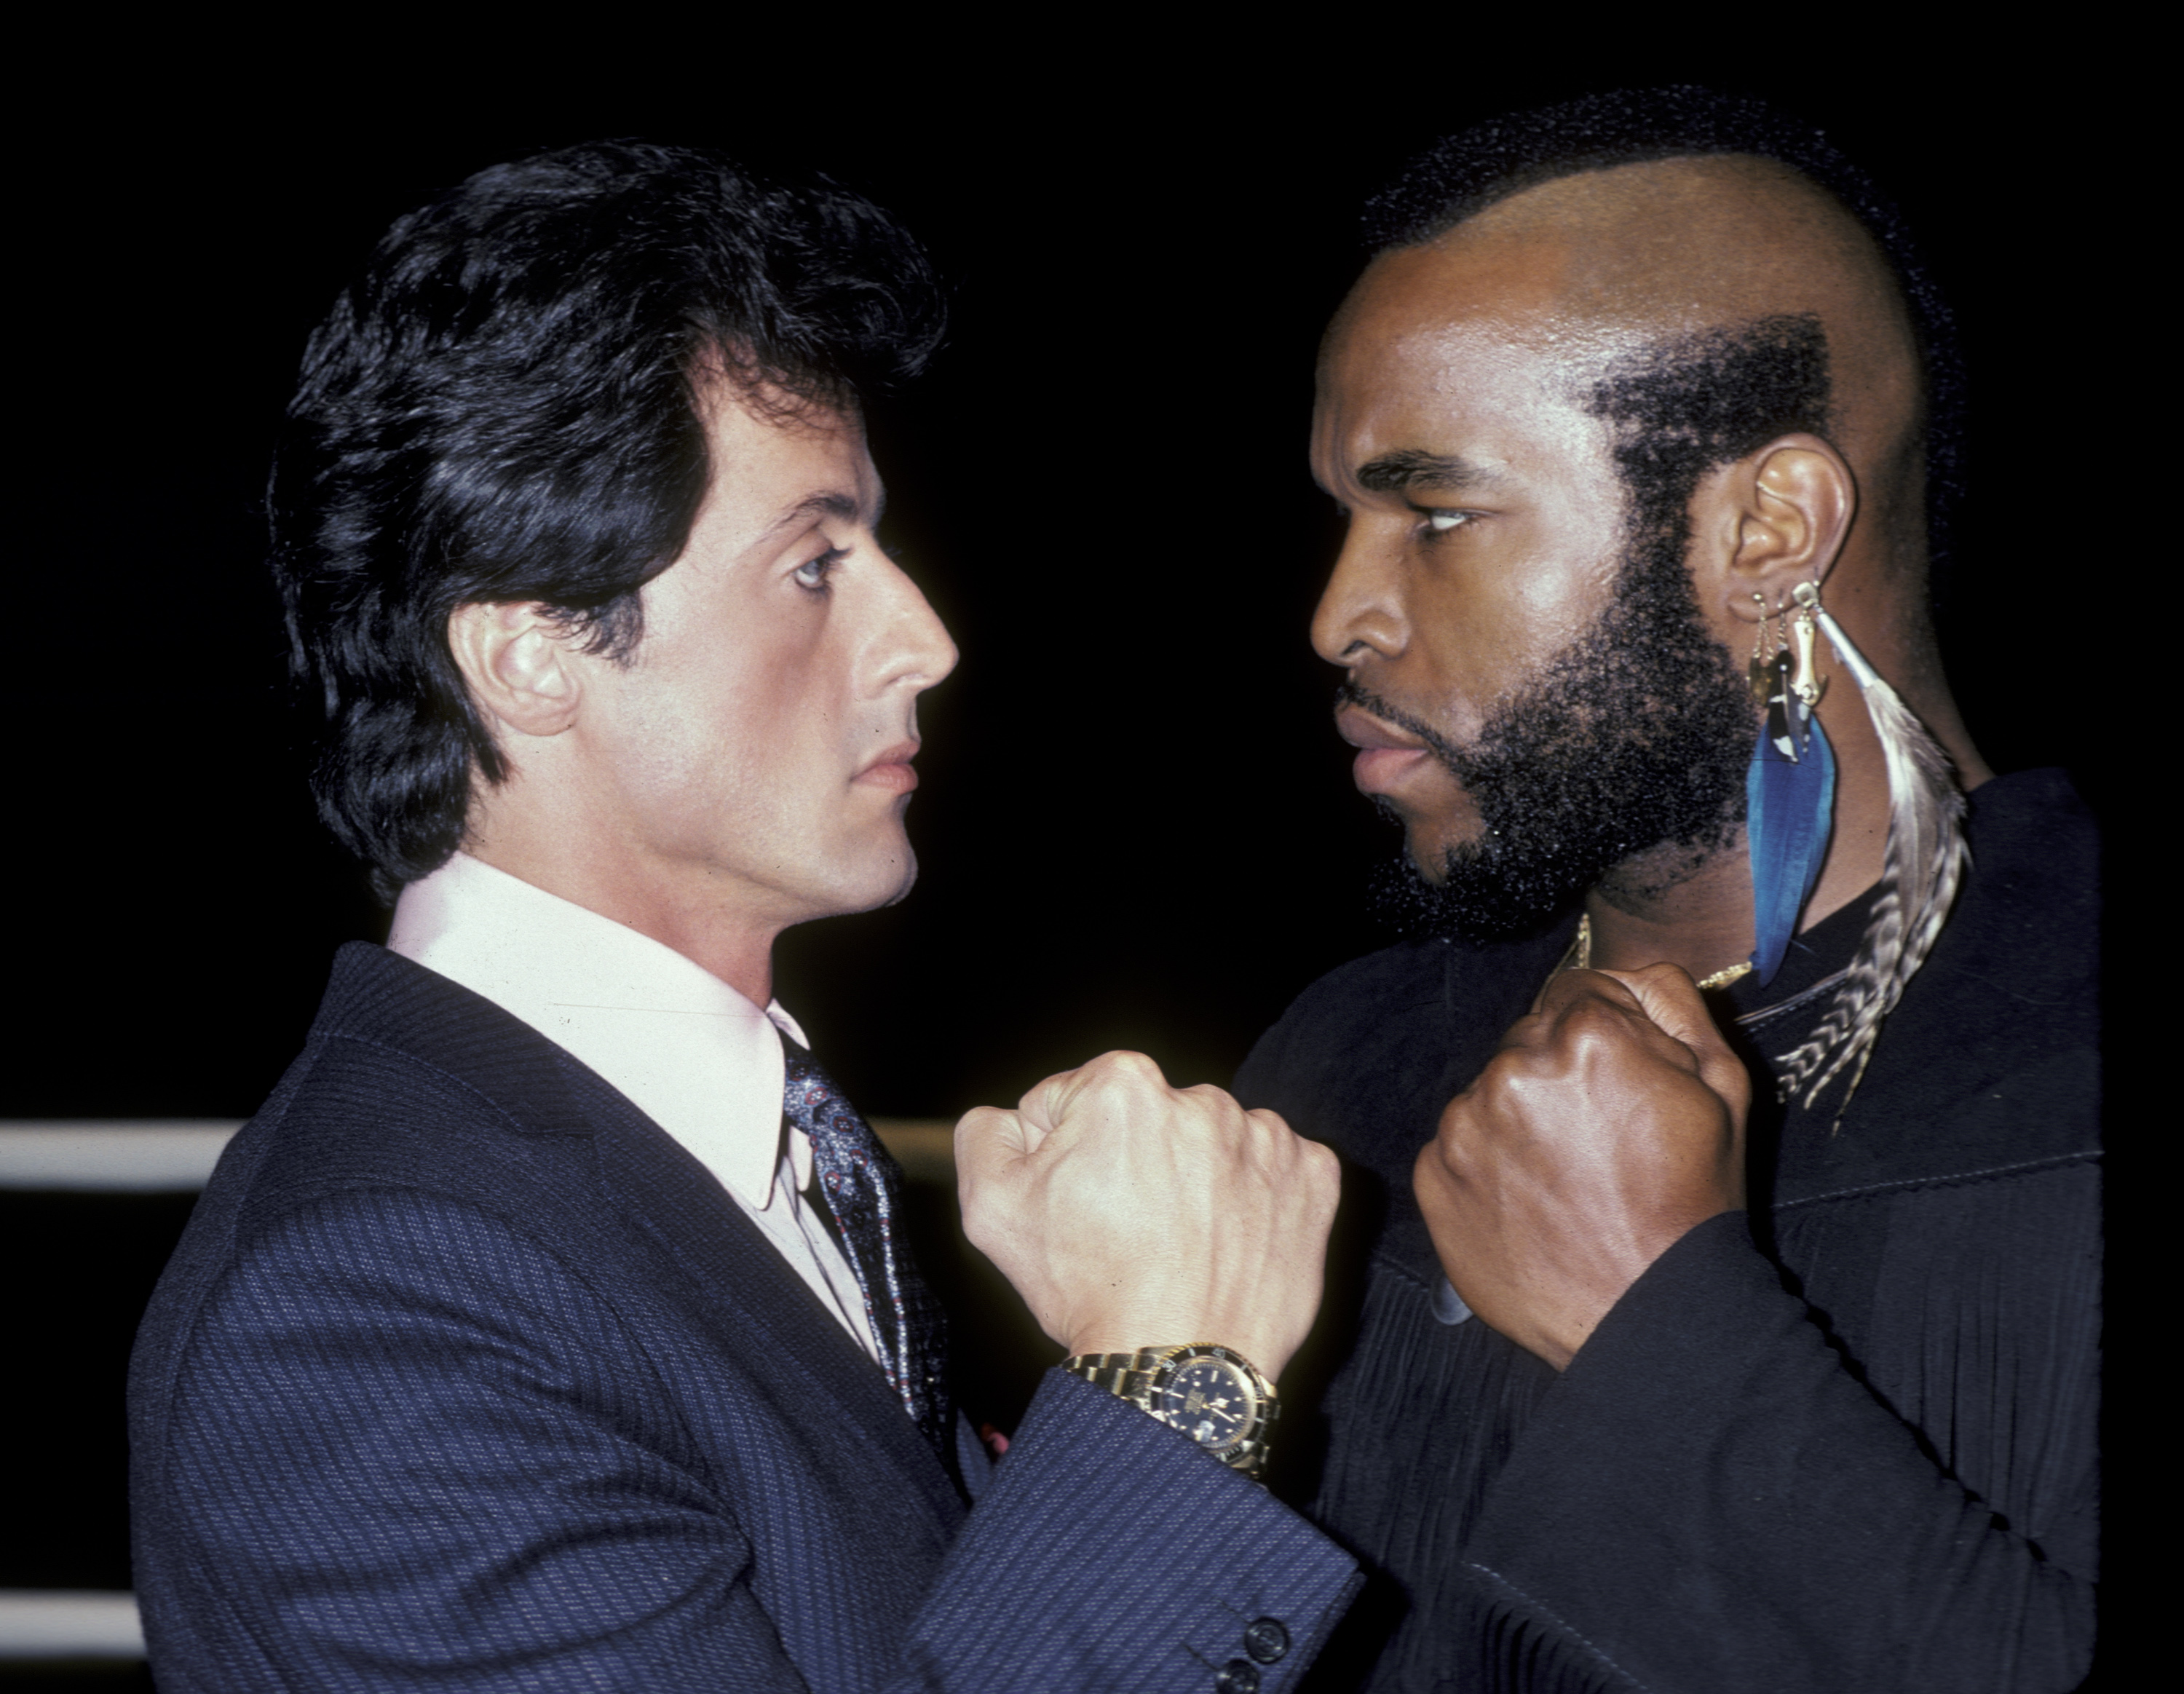 Mr. T. and Sylvester Stallone at the LA Press Conference for 'Rocky III' | Source: Getty Images